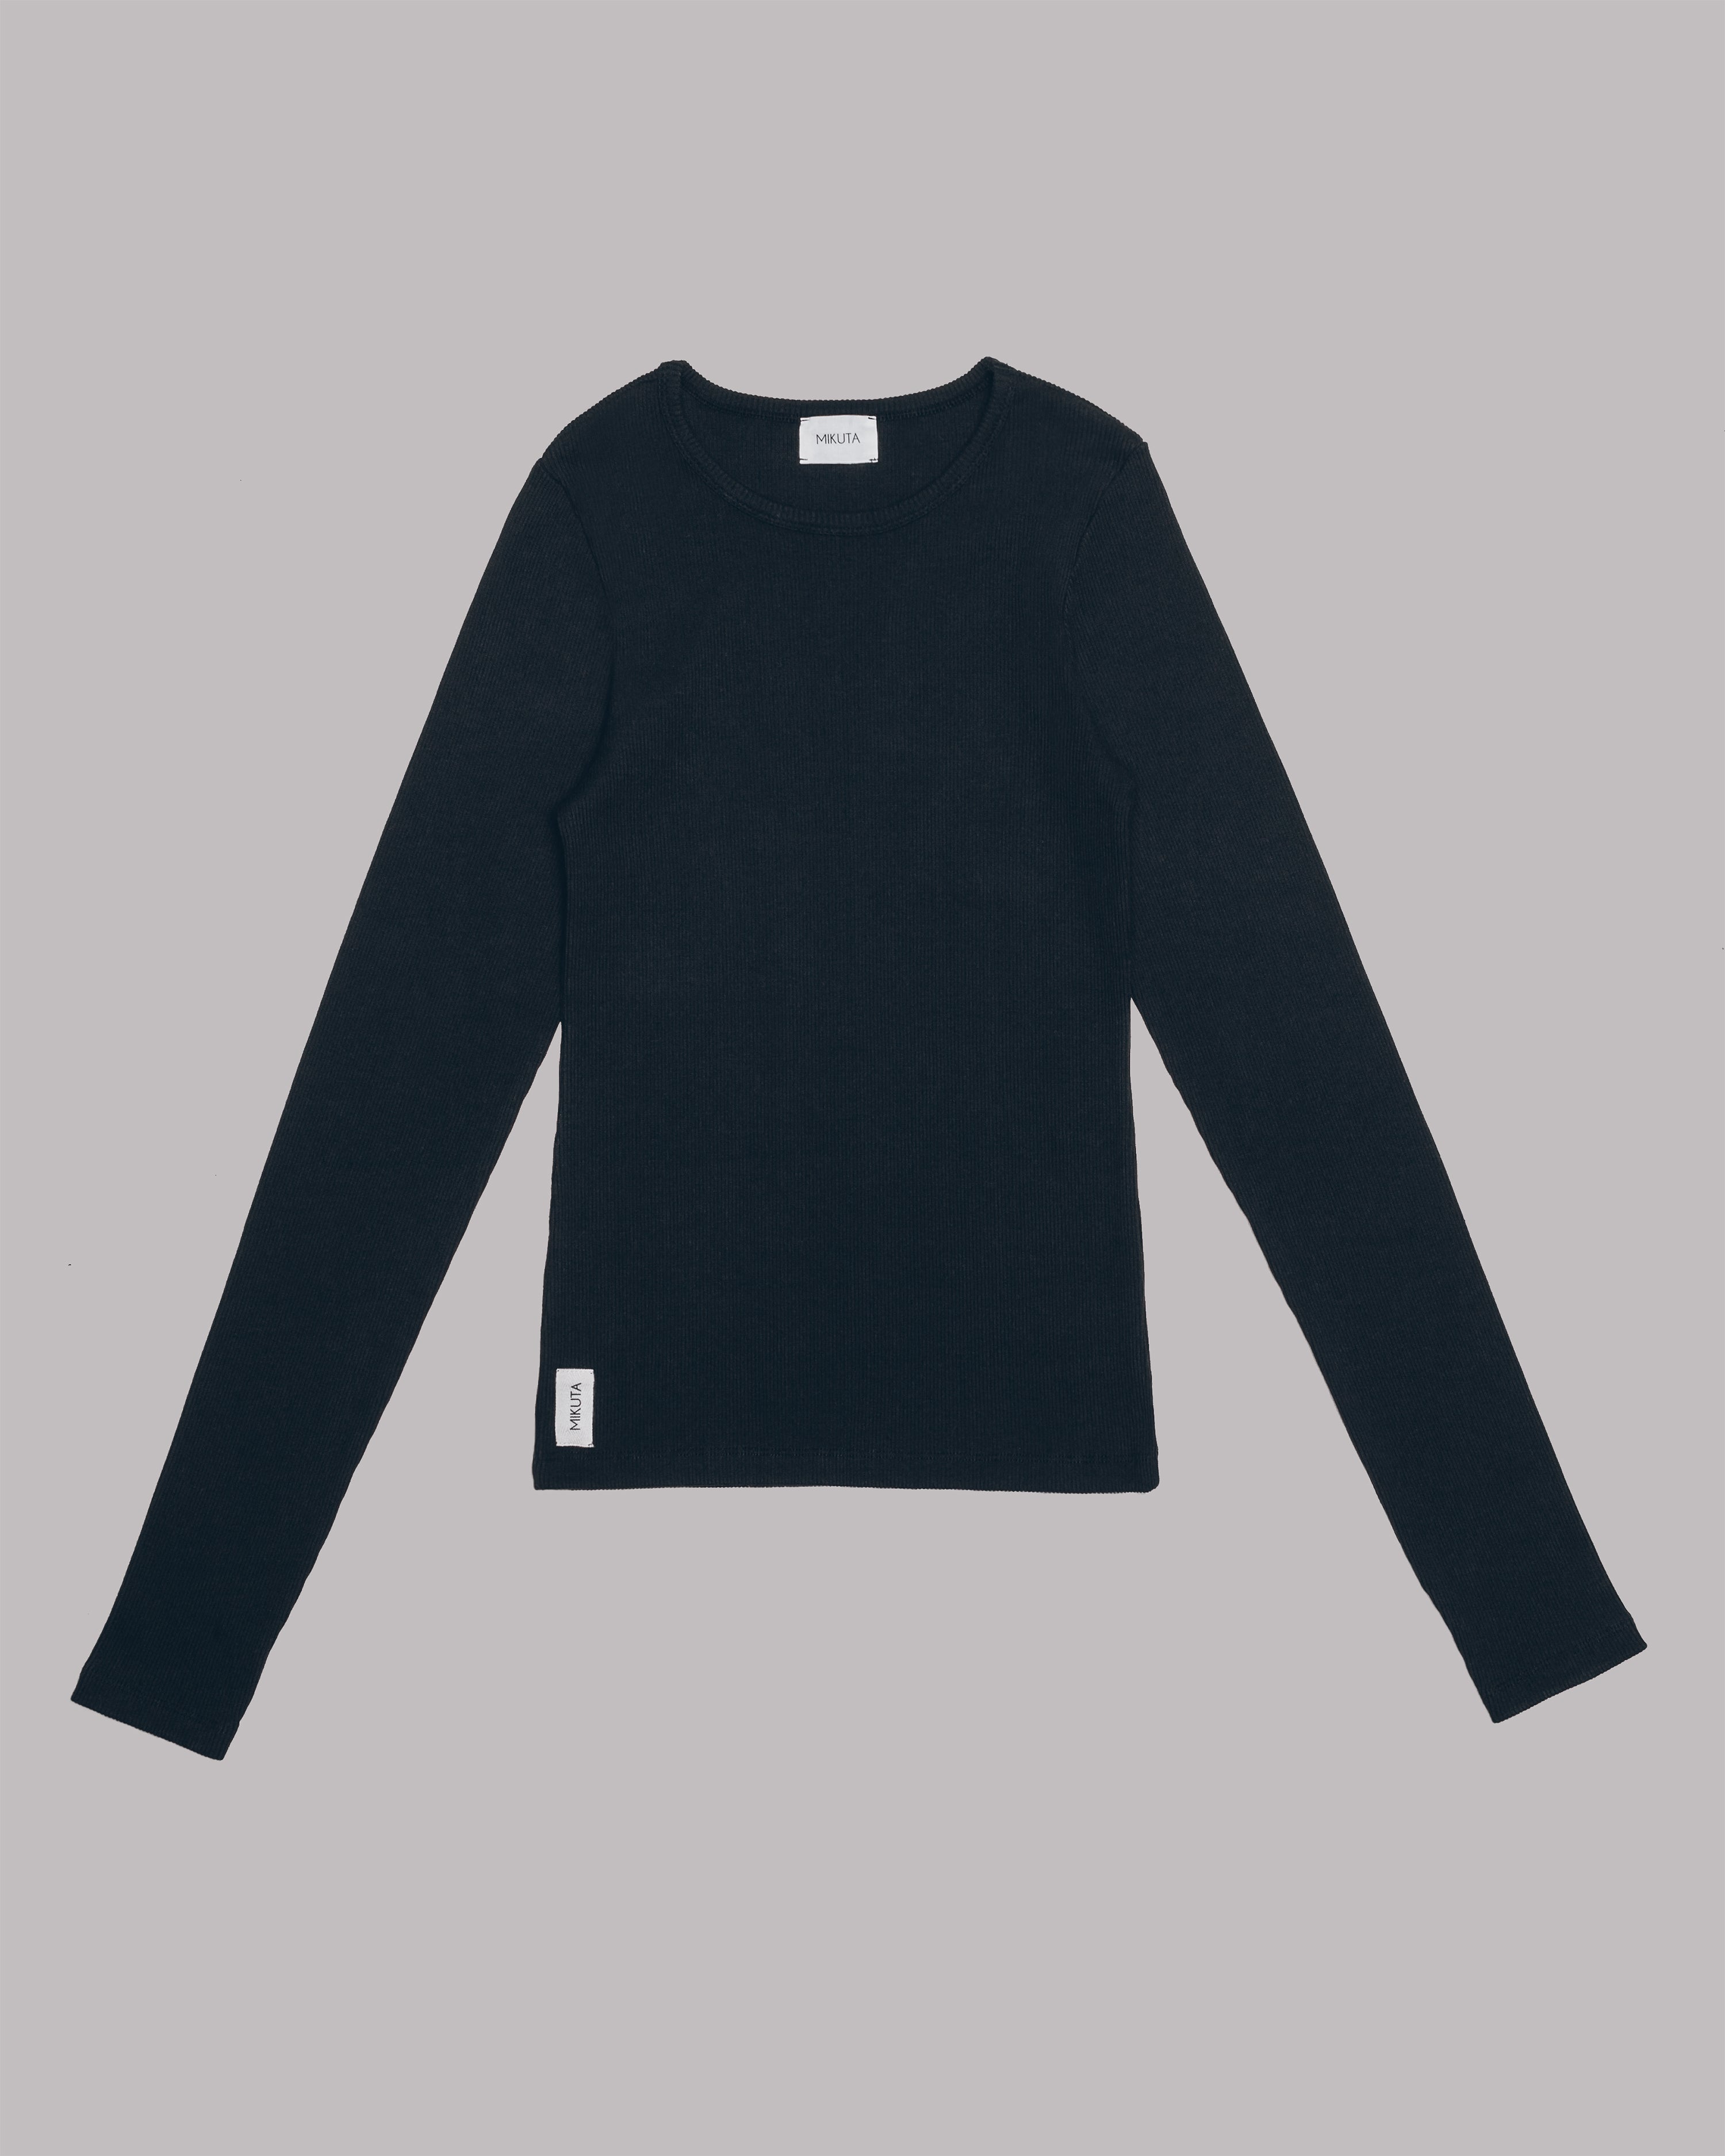 LONG SLEEVE RIBBED CREW NECK IN BLACK – thetstore_clothing